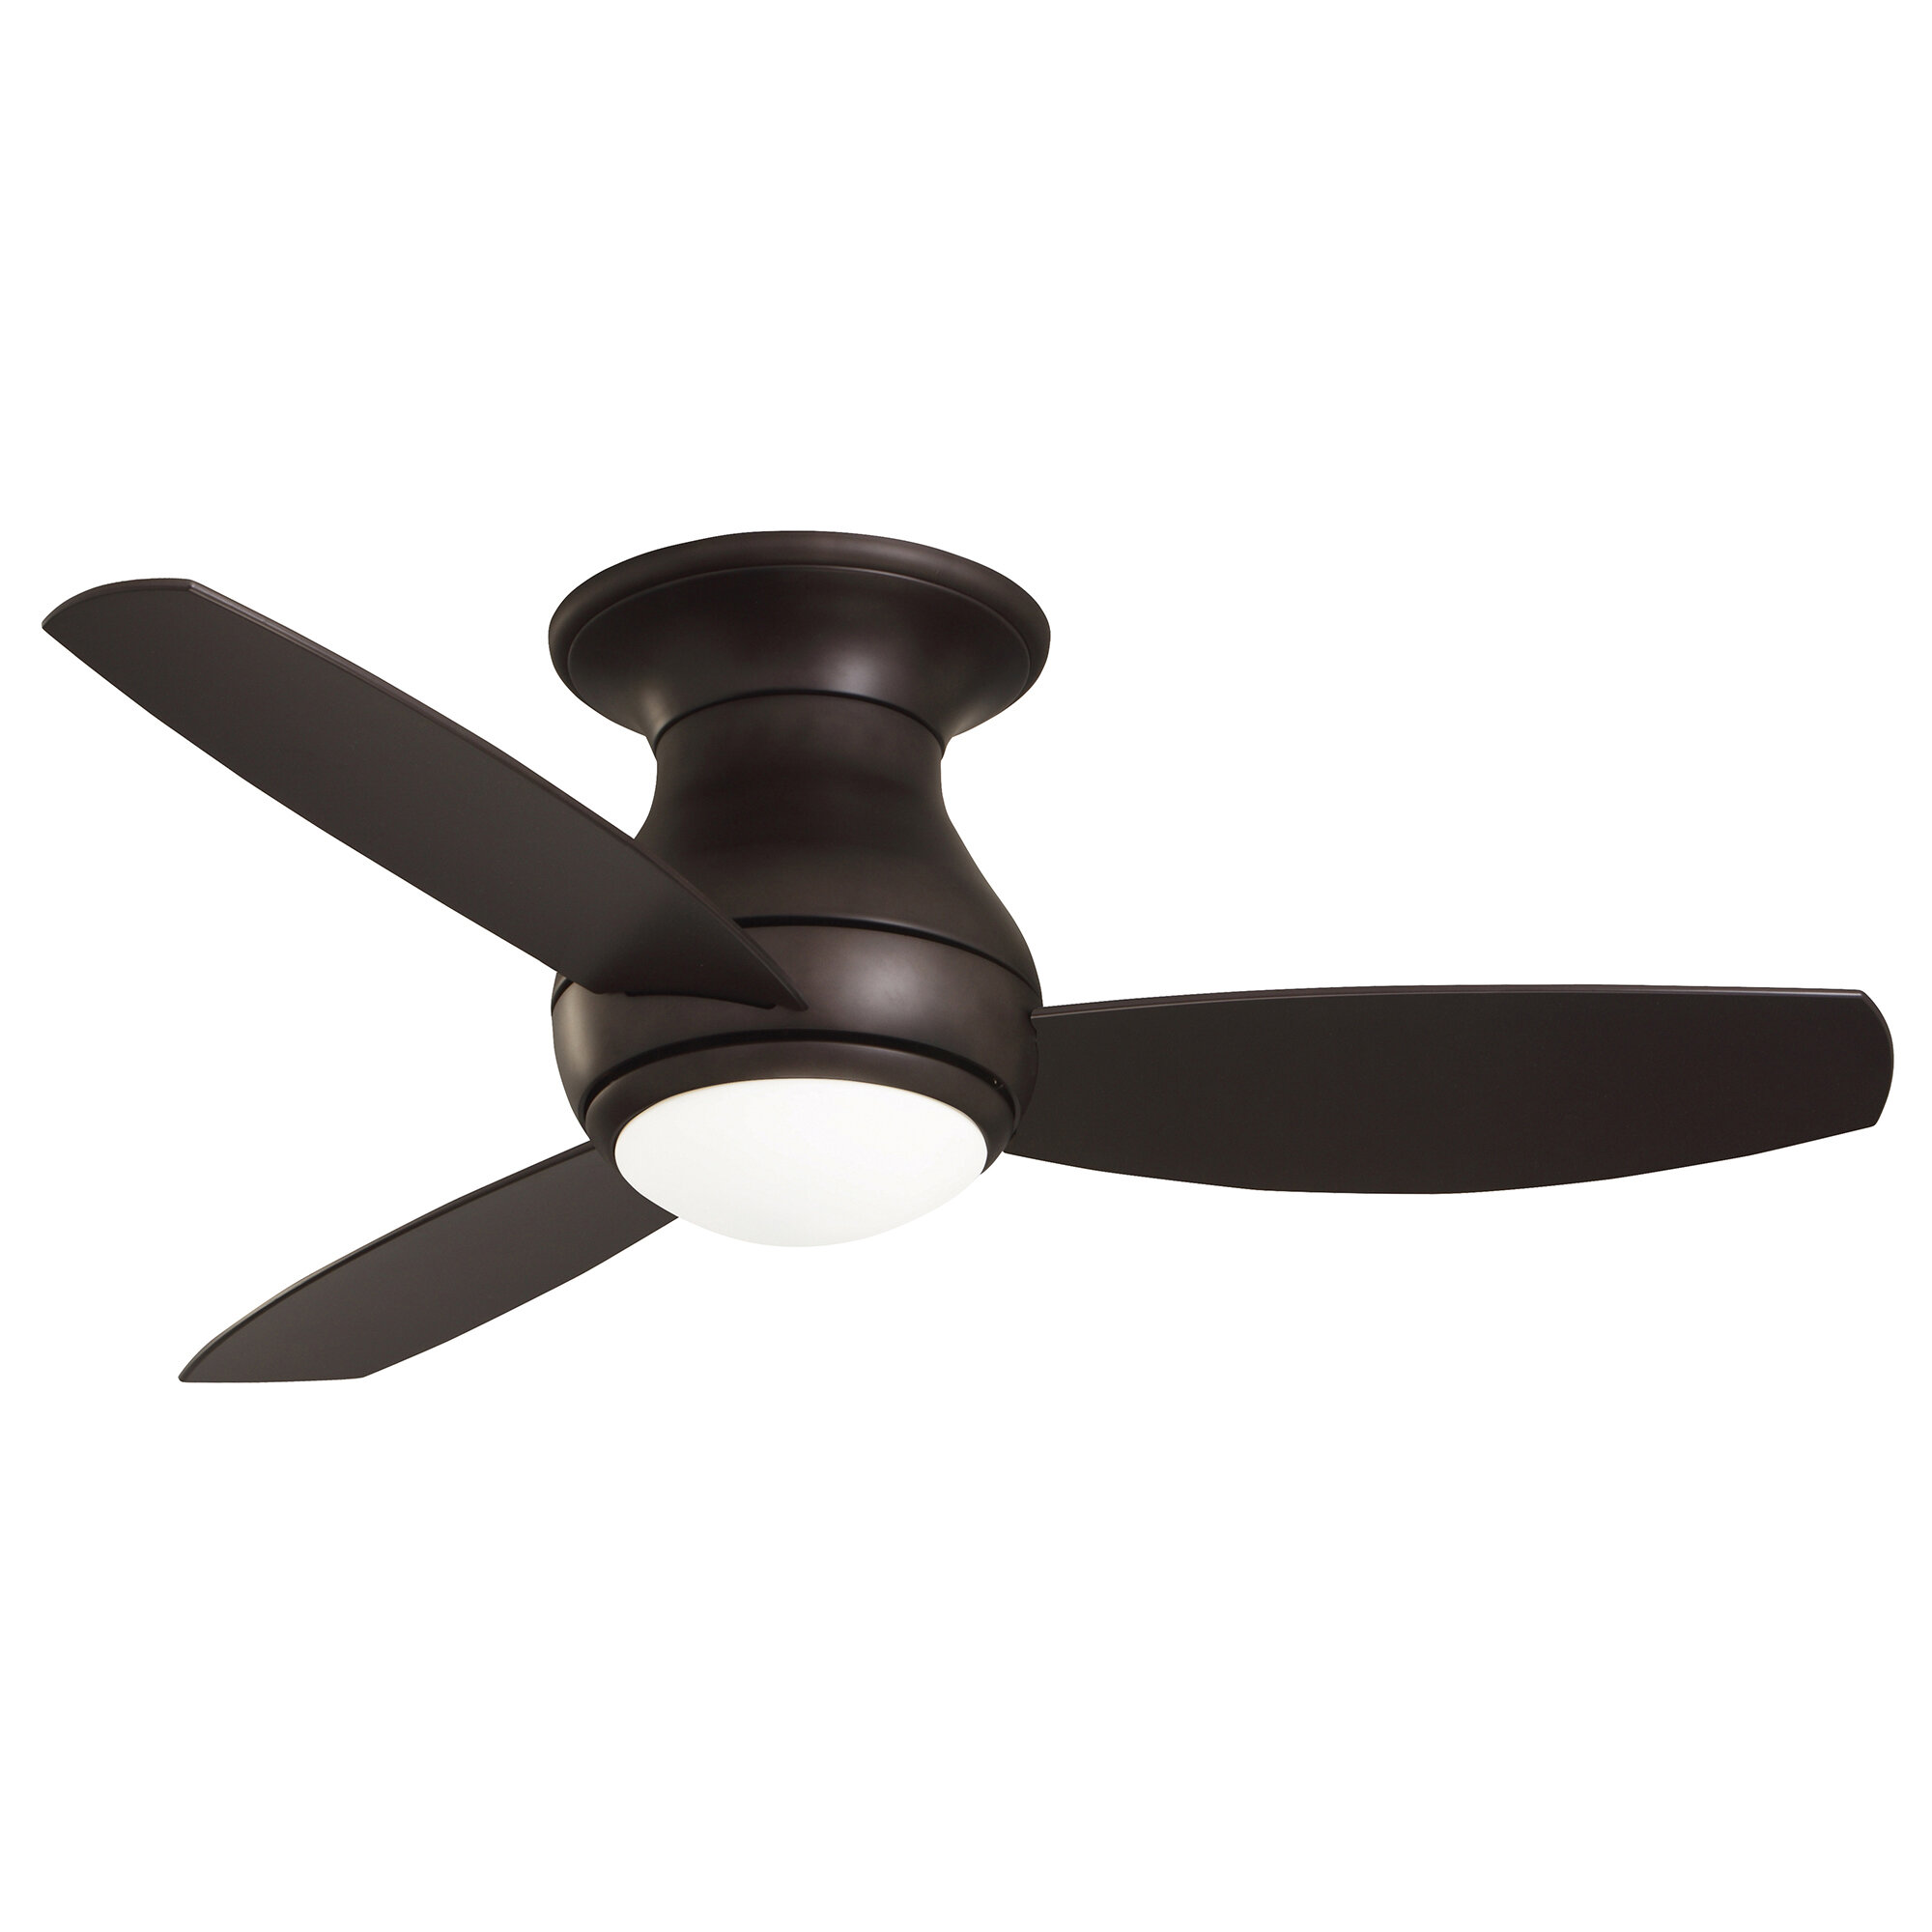 Luminance Brands 3 Blade Outdoor Led Flush Mount Ceiling Fan With Remote Control And Light Kit Included Reviews Wayfair